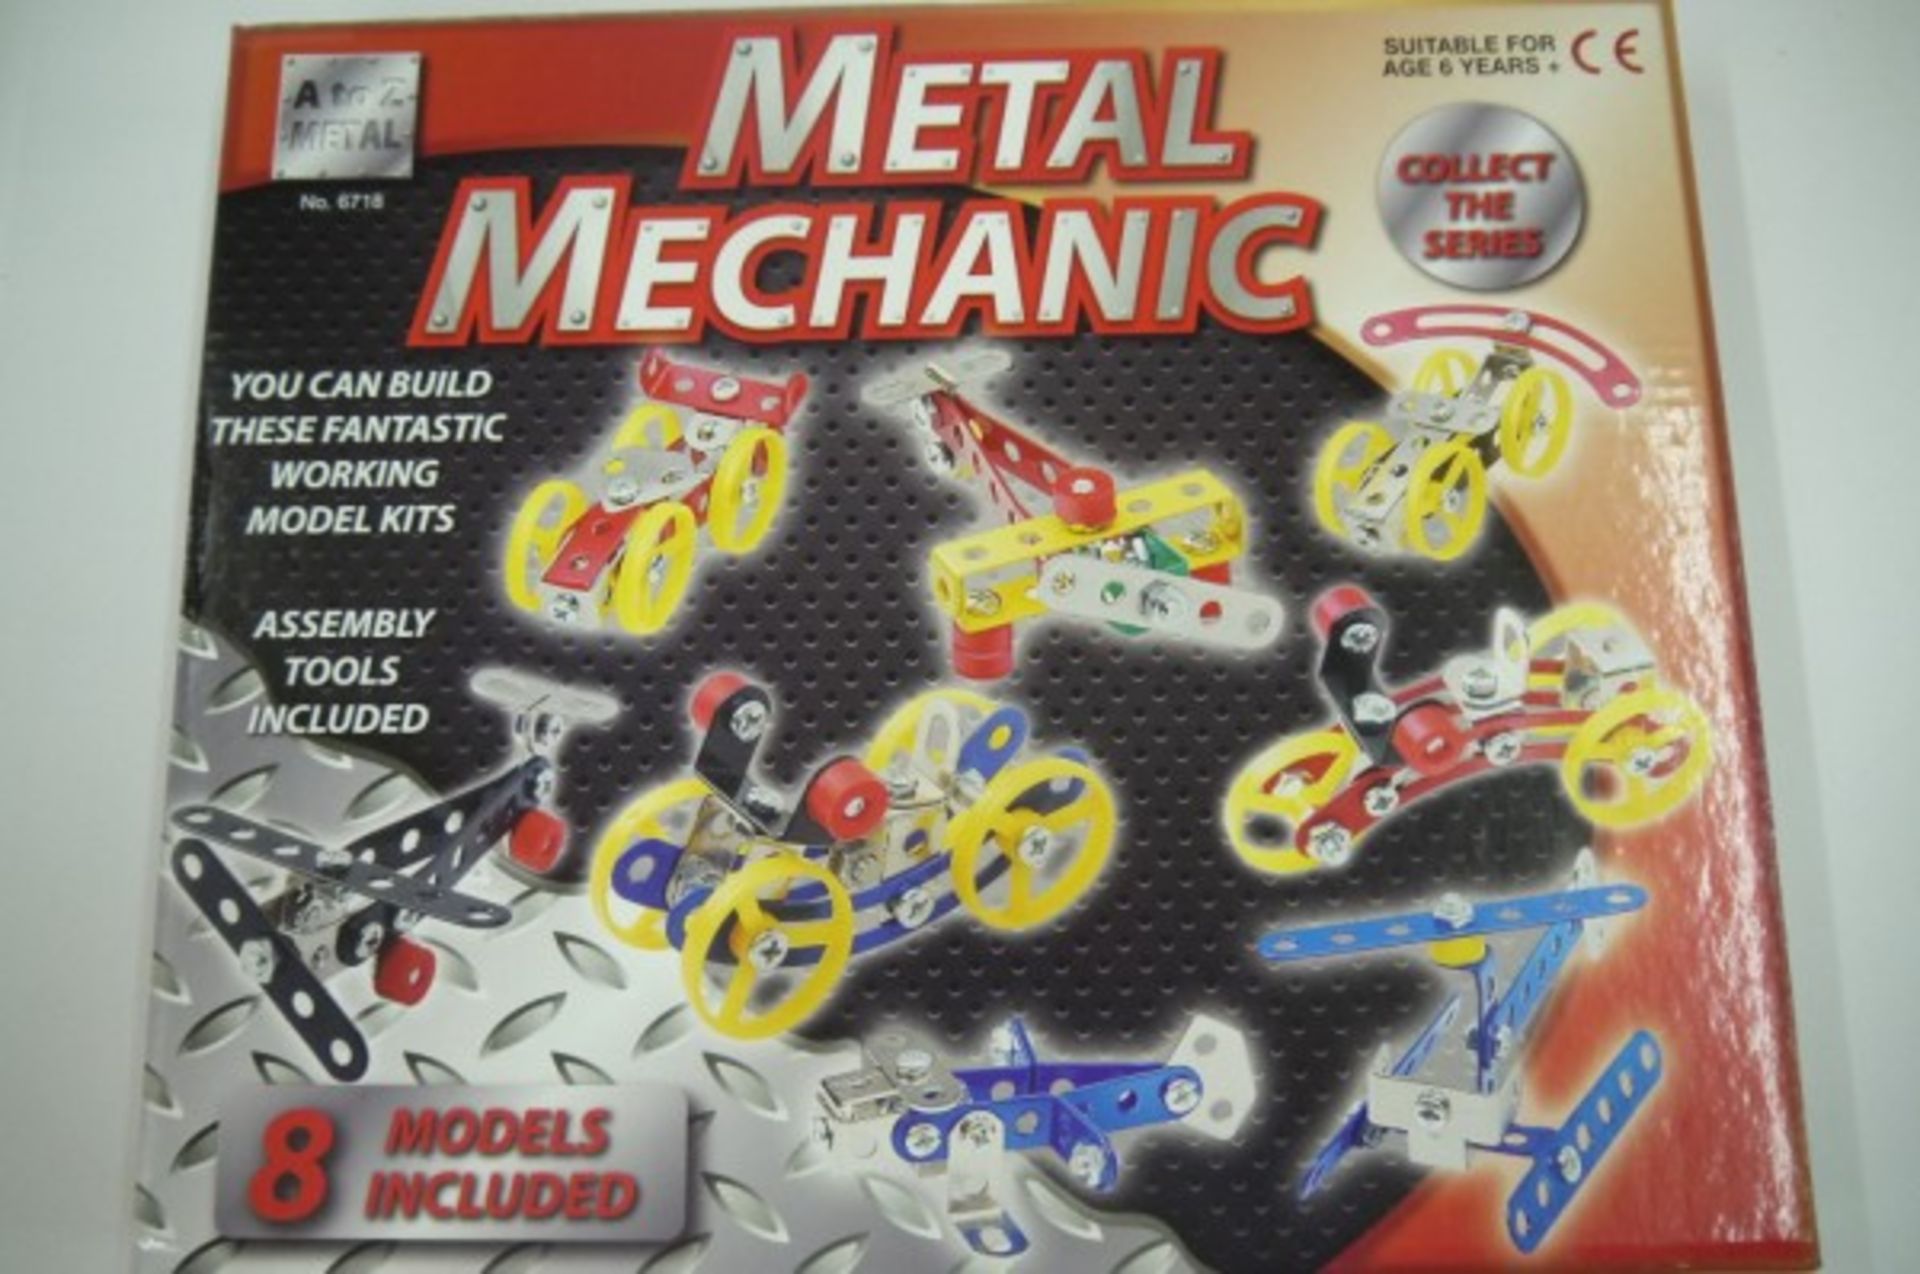 V Brand New Meccano Type Construction Kit Makes 8 Models (Includes Tools)